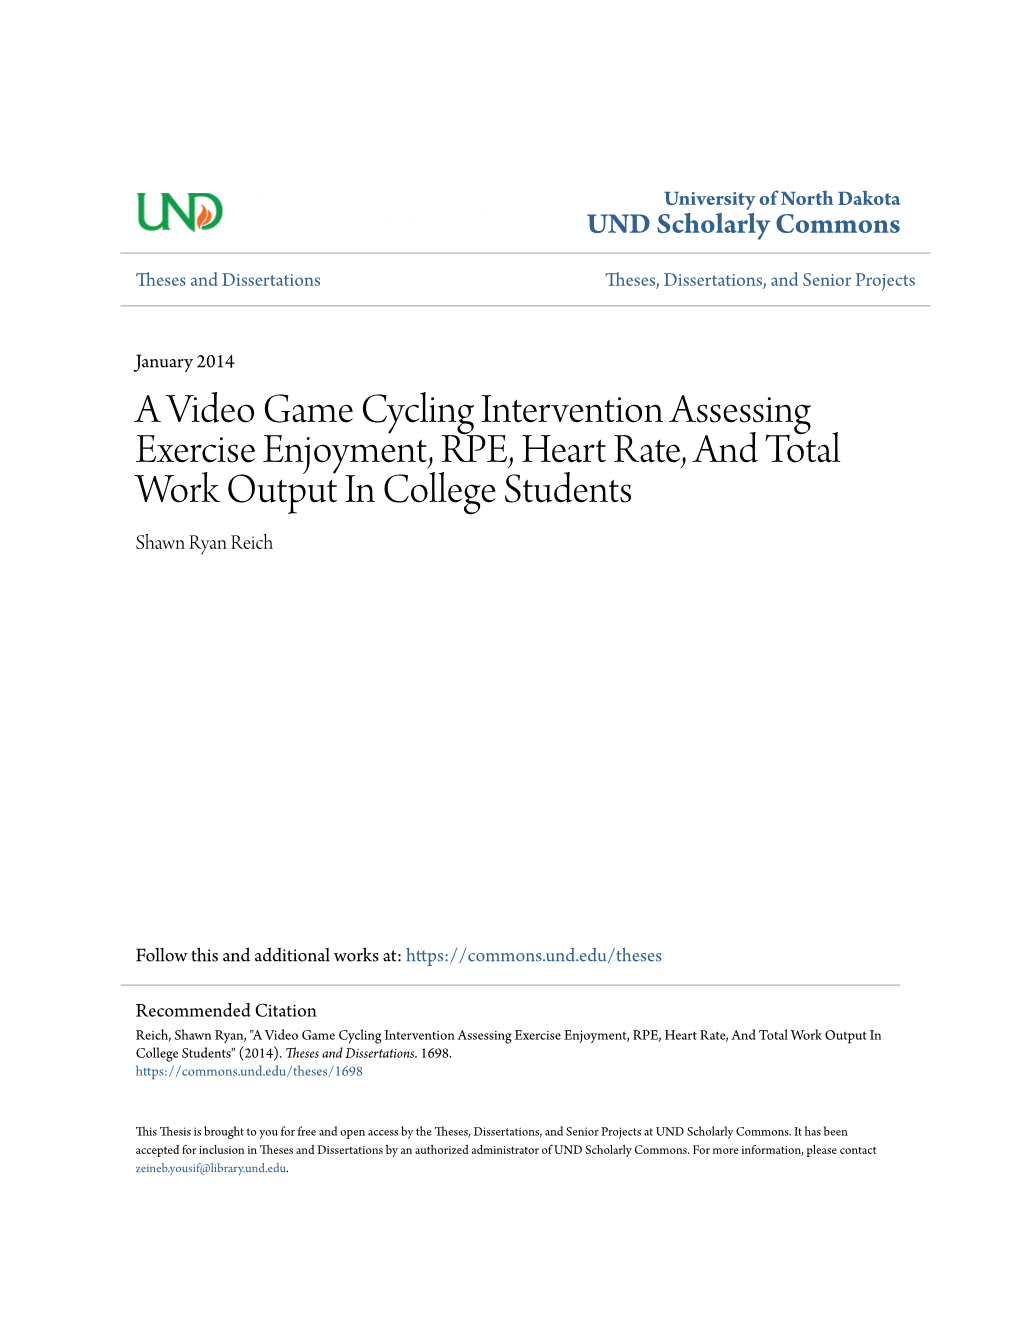 A Video Game Cycling Intervention Assessing Exercise Enjoyment, RPE, Heart Rate, and Total Work Output in College Students Shawn Ryan Reich